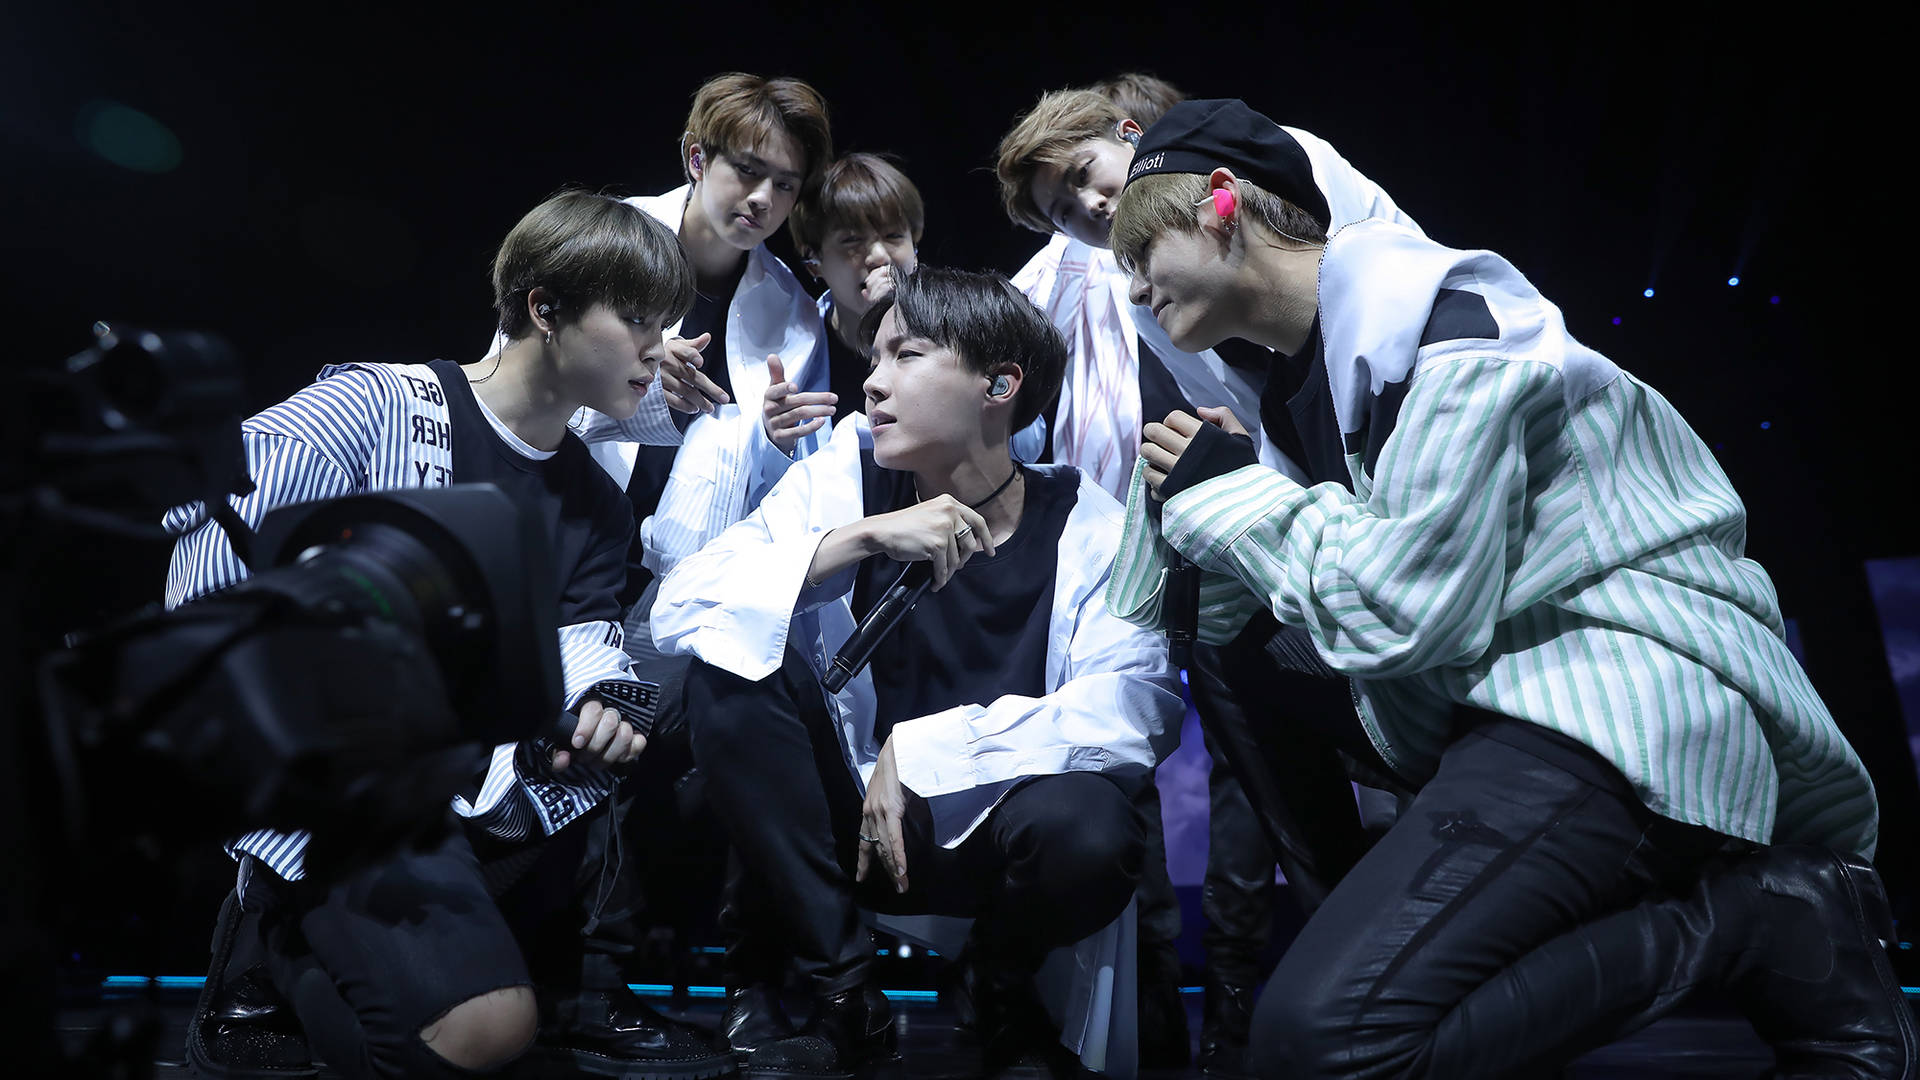 BTS Concert With Everyone Looking At Hoseok Wallpaper